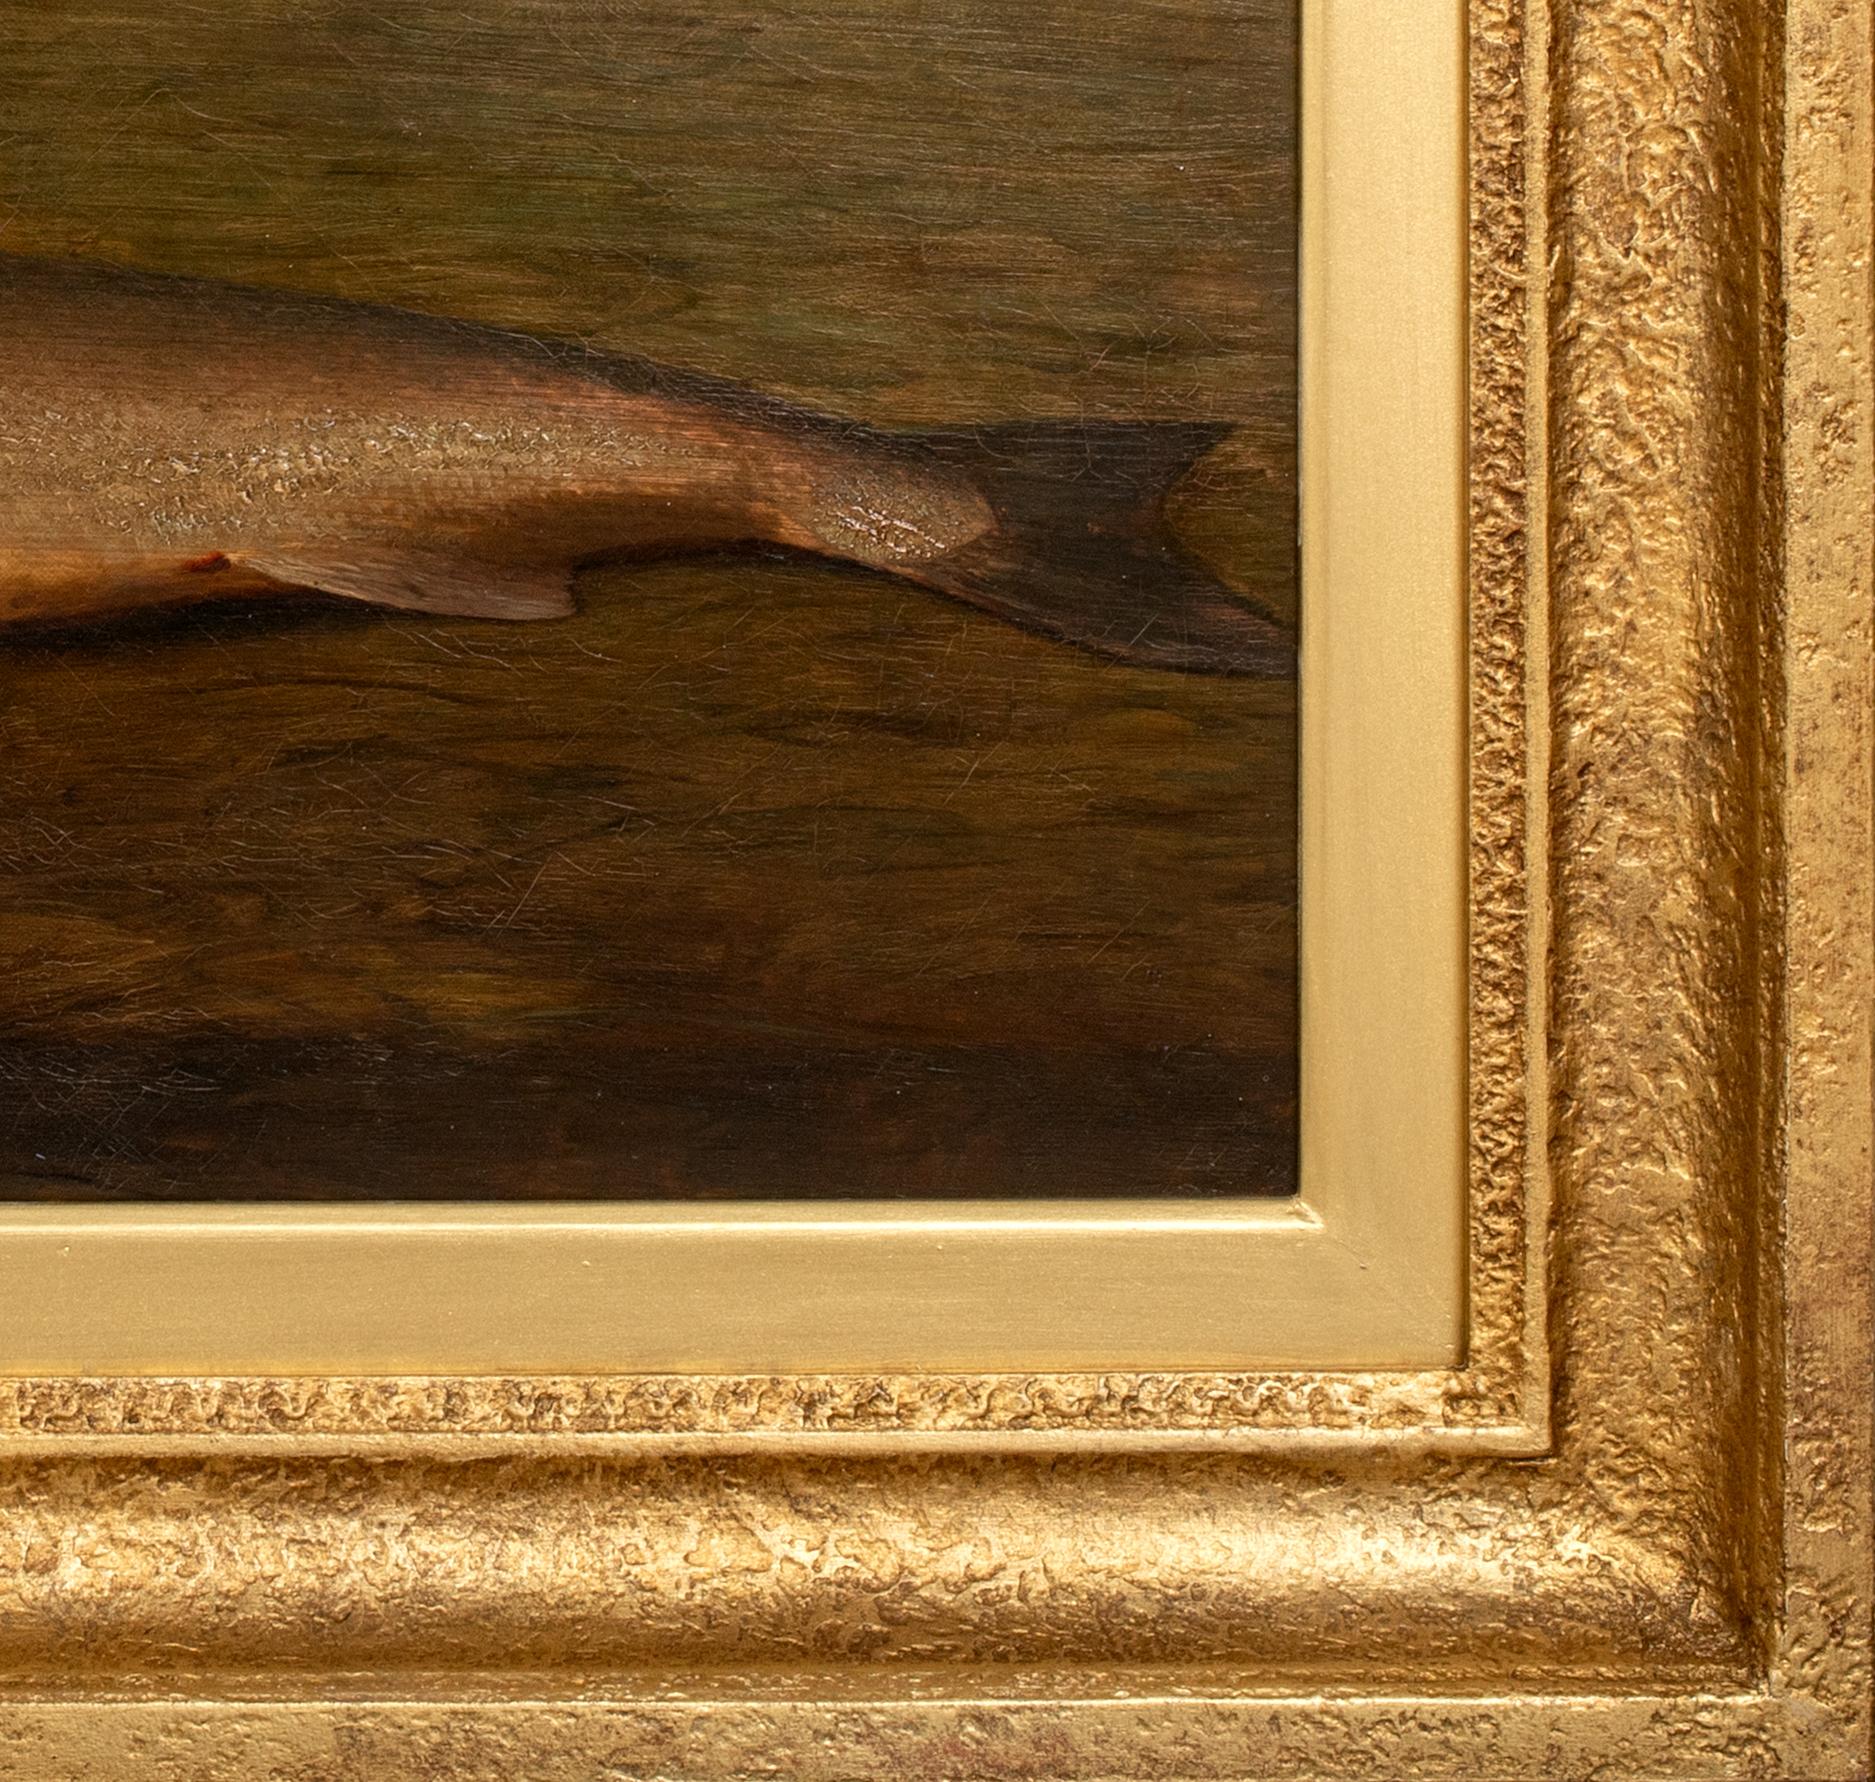 Study Of A Trout, 19th century

British School

19th Century British School still life study of a trout on the riverbank, oil on canvas. Excellent quality and condition, faintly signed and presented in its original antique gilt frame. Magnificent